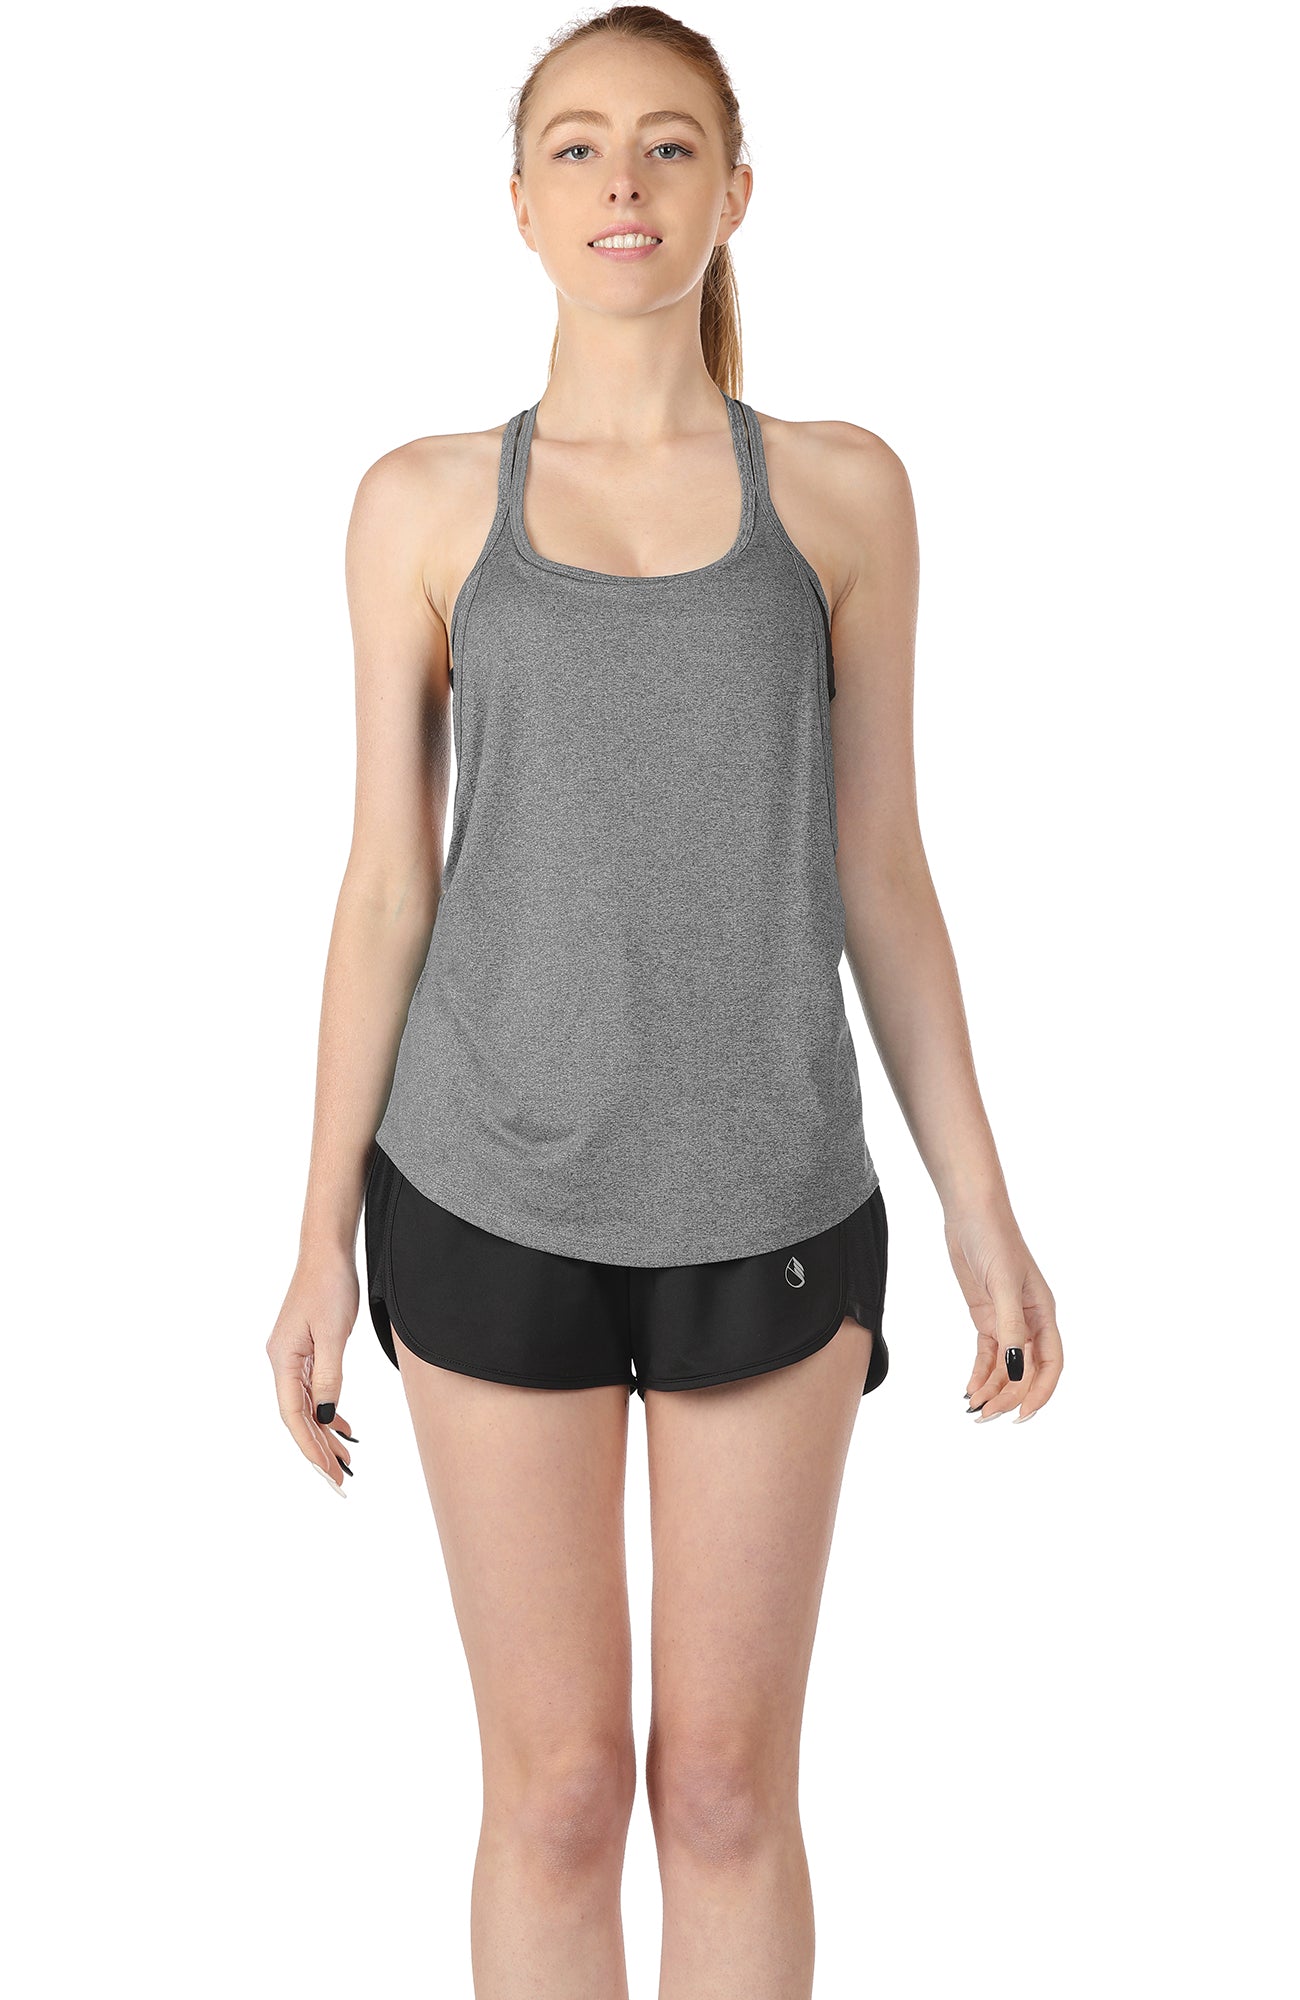 Basic Editions Women's Gray Athletic Tank Top Built in Bra